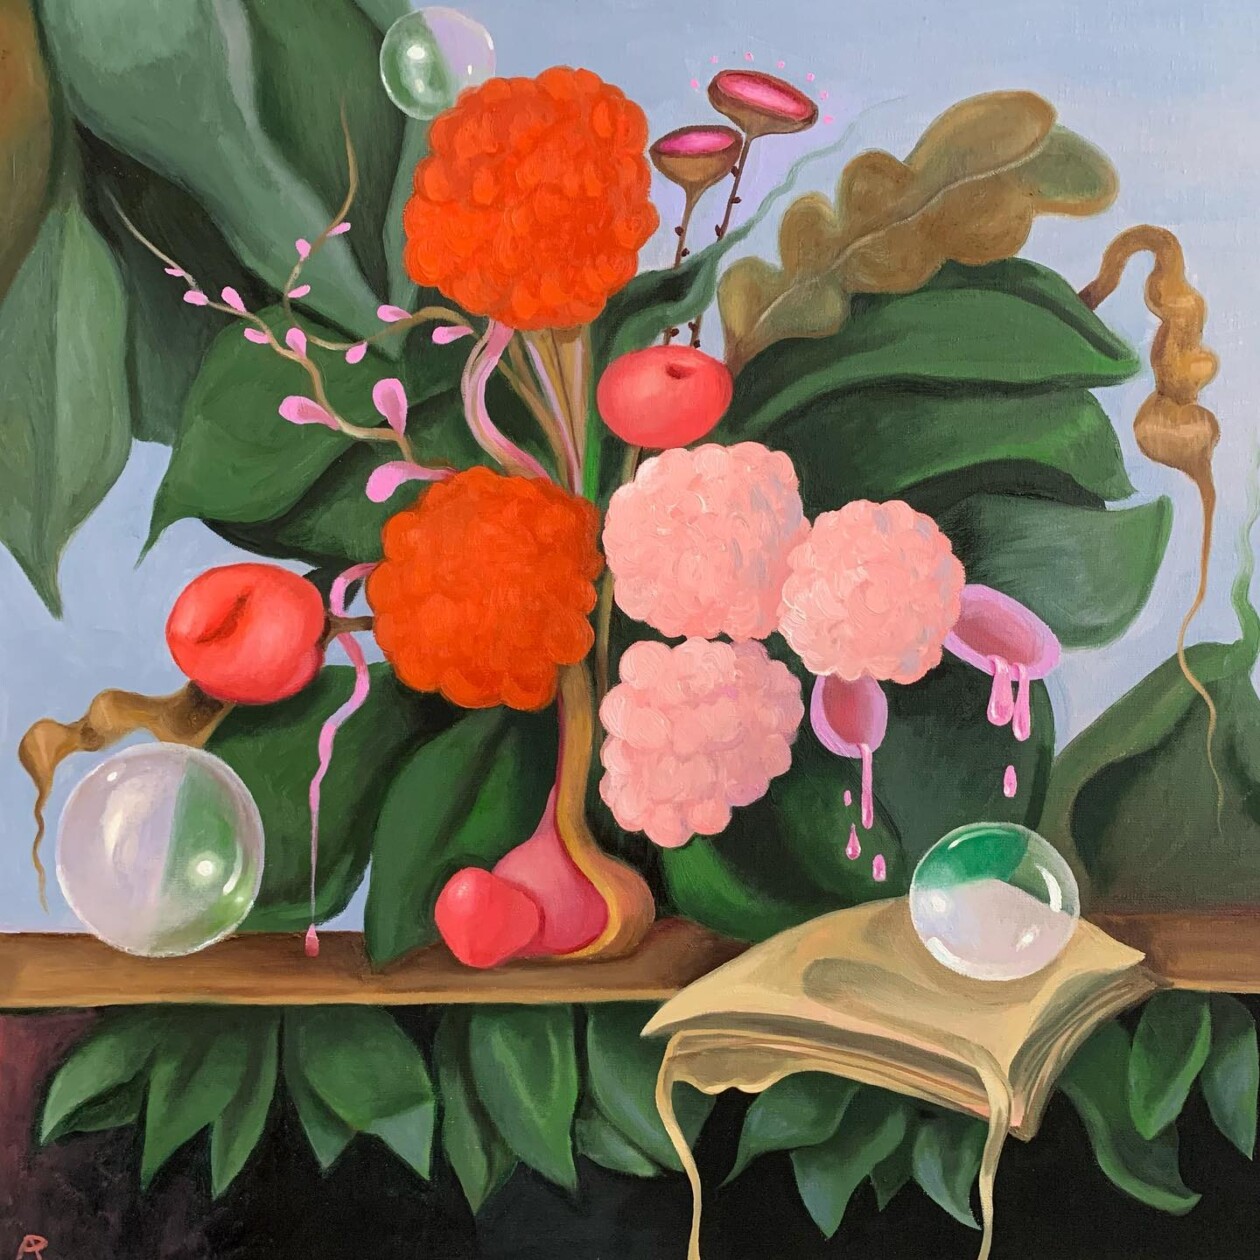 Lush Surreal Still Life Paintings By American Artist Arabella Proffer (5)